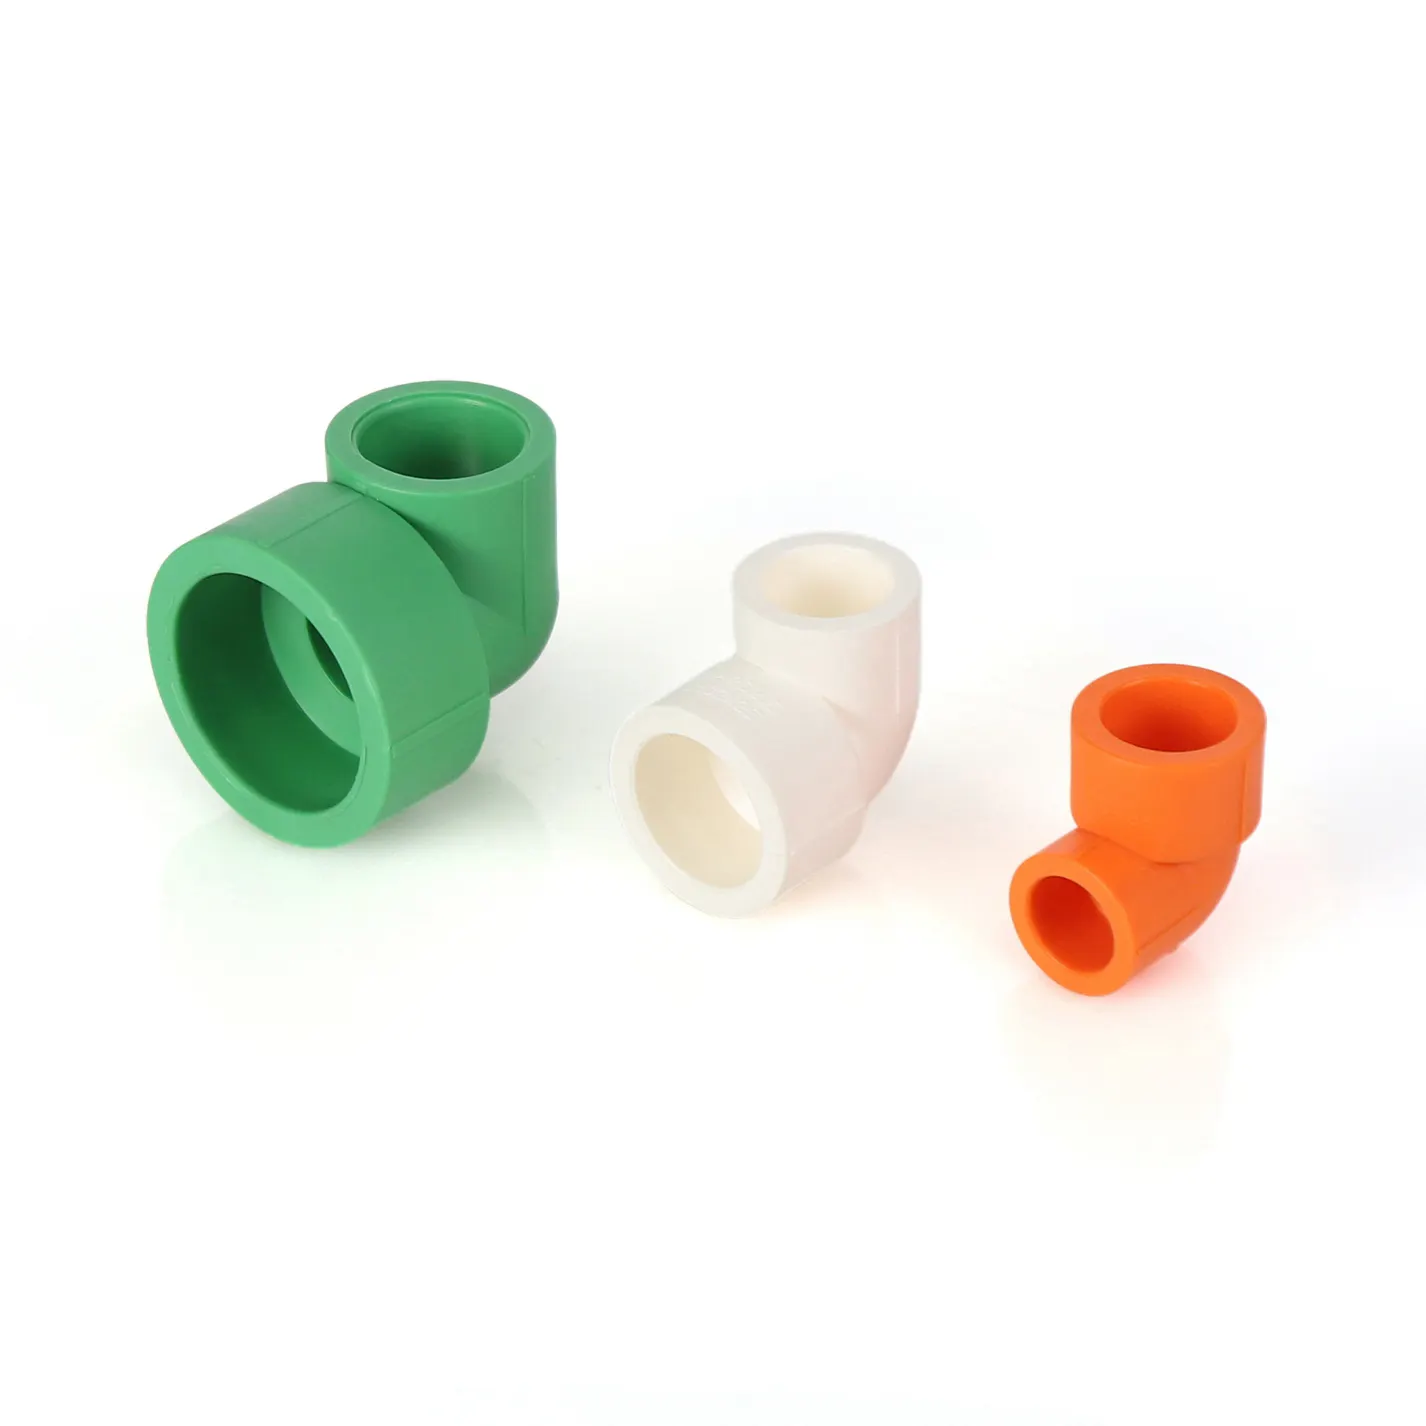 New Design Ppr Reducing Elbow Connector Plastic Plumbing Pipe Ppr Fitting Water Supply Ppr Elbow